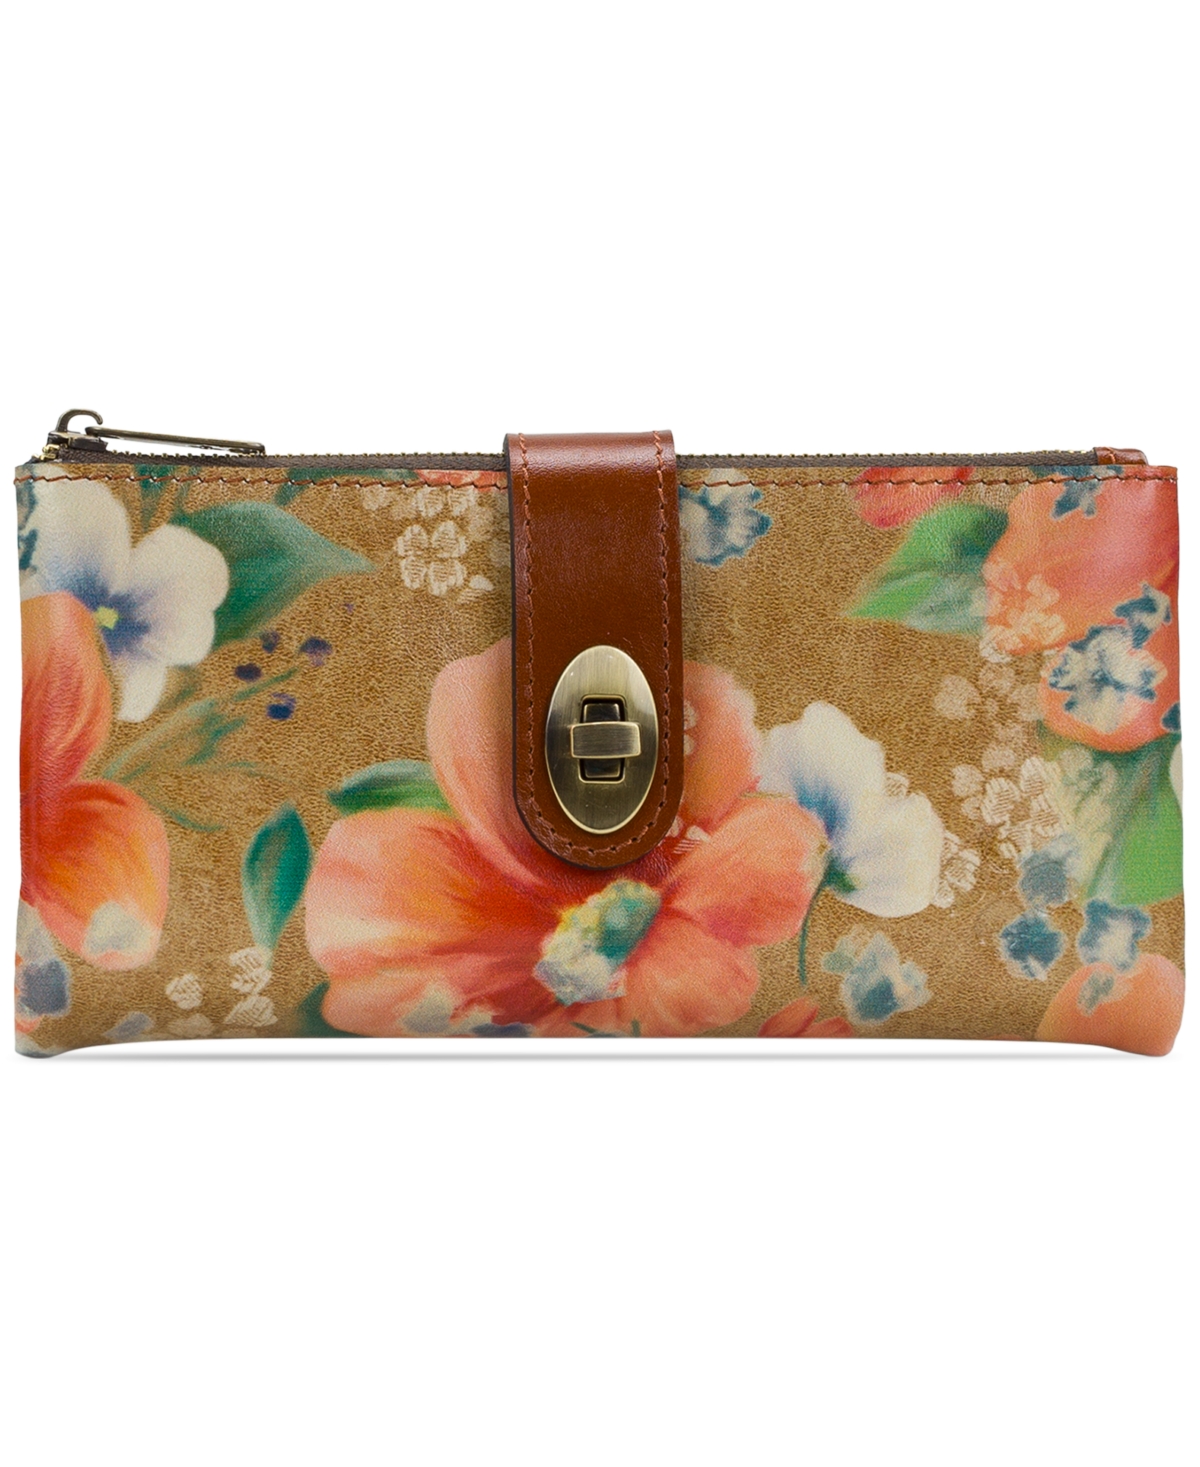 Patricia Nash Annesley Leather Wristlet In Apricot Blossoms